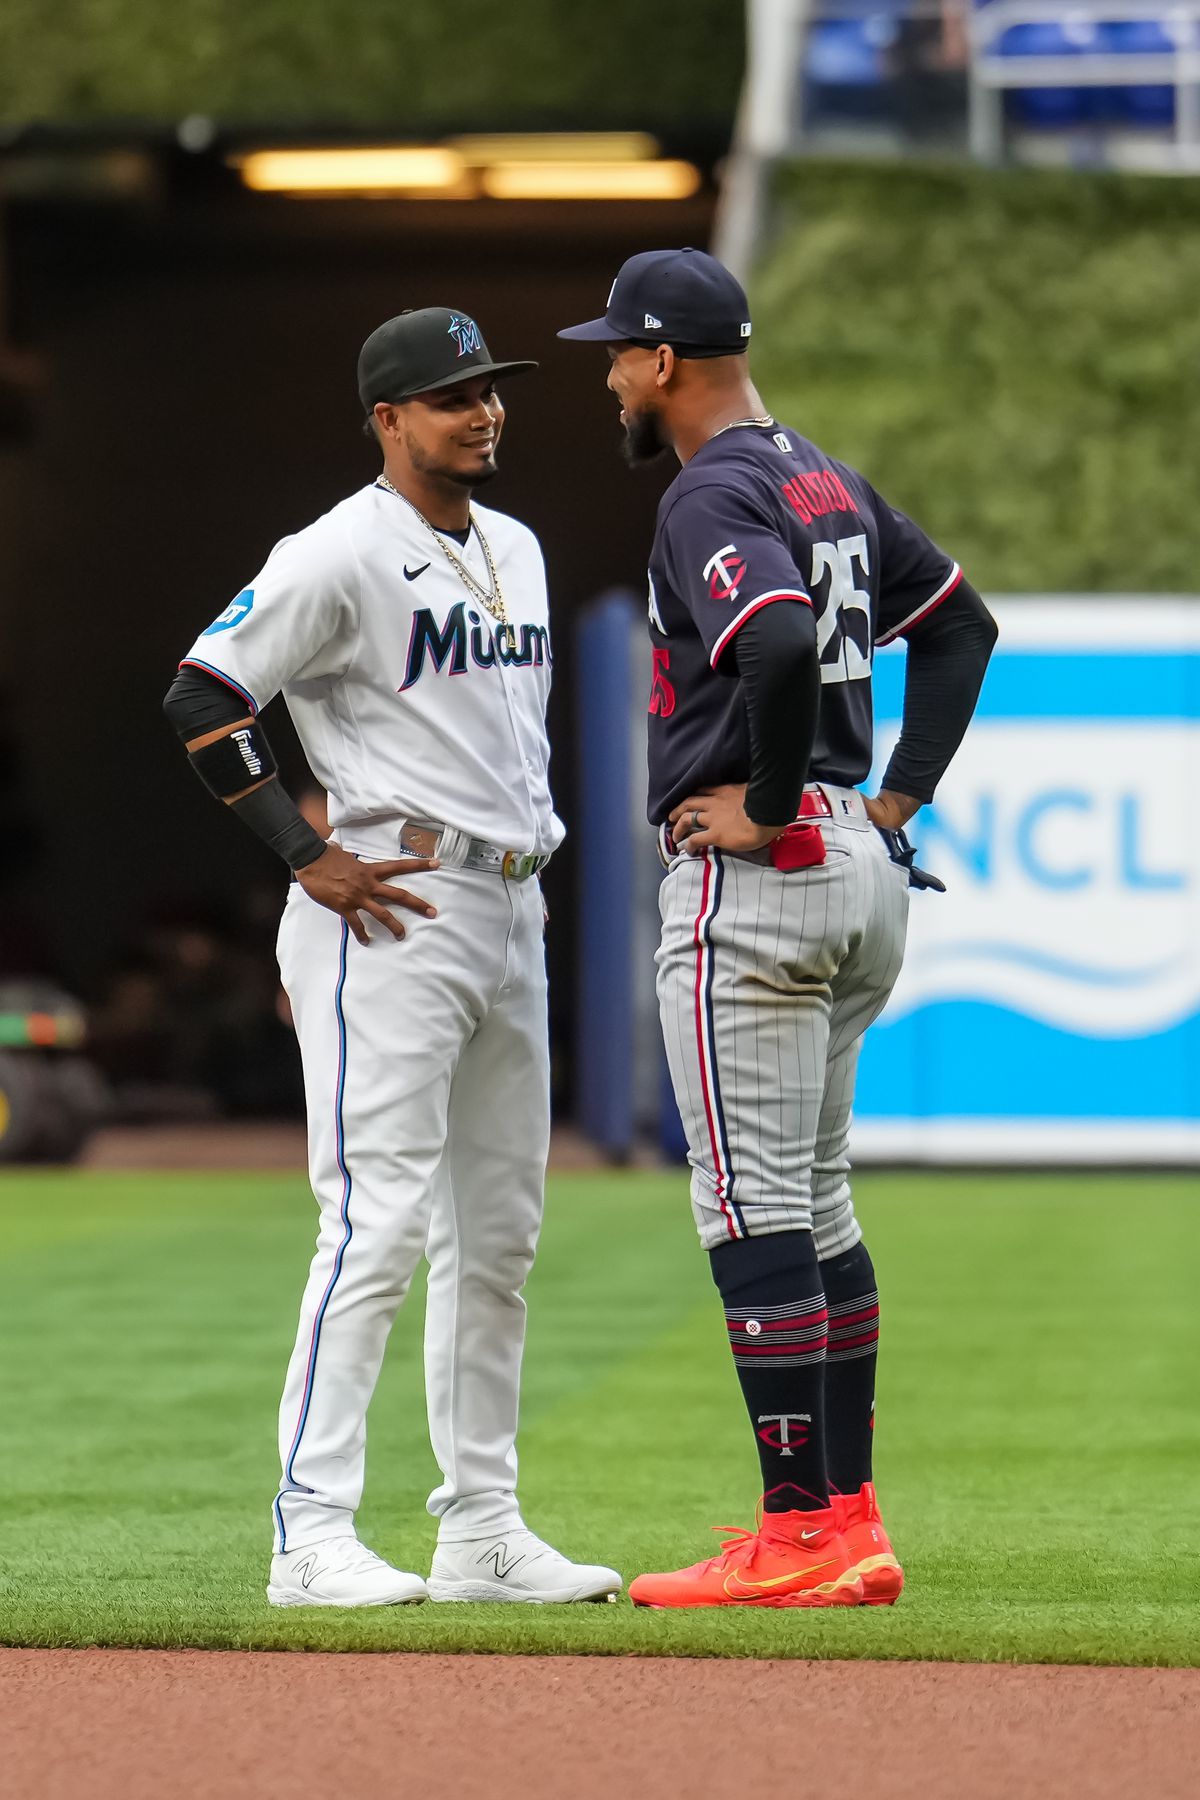 Luis Arraez #3 of the Miami Marlins looks on with Byron Buxton #25 of the Minnesota Twins prior to the game on April 3, 2023 at loanDepot park in Miami, Florida.